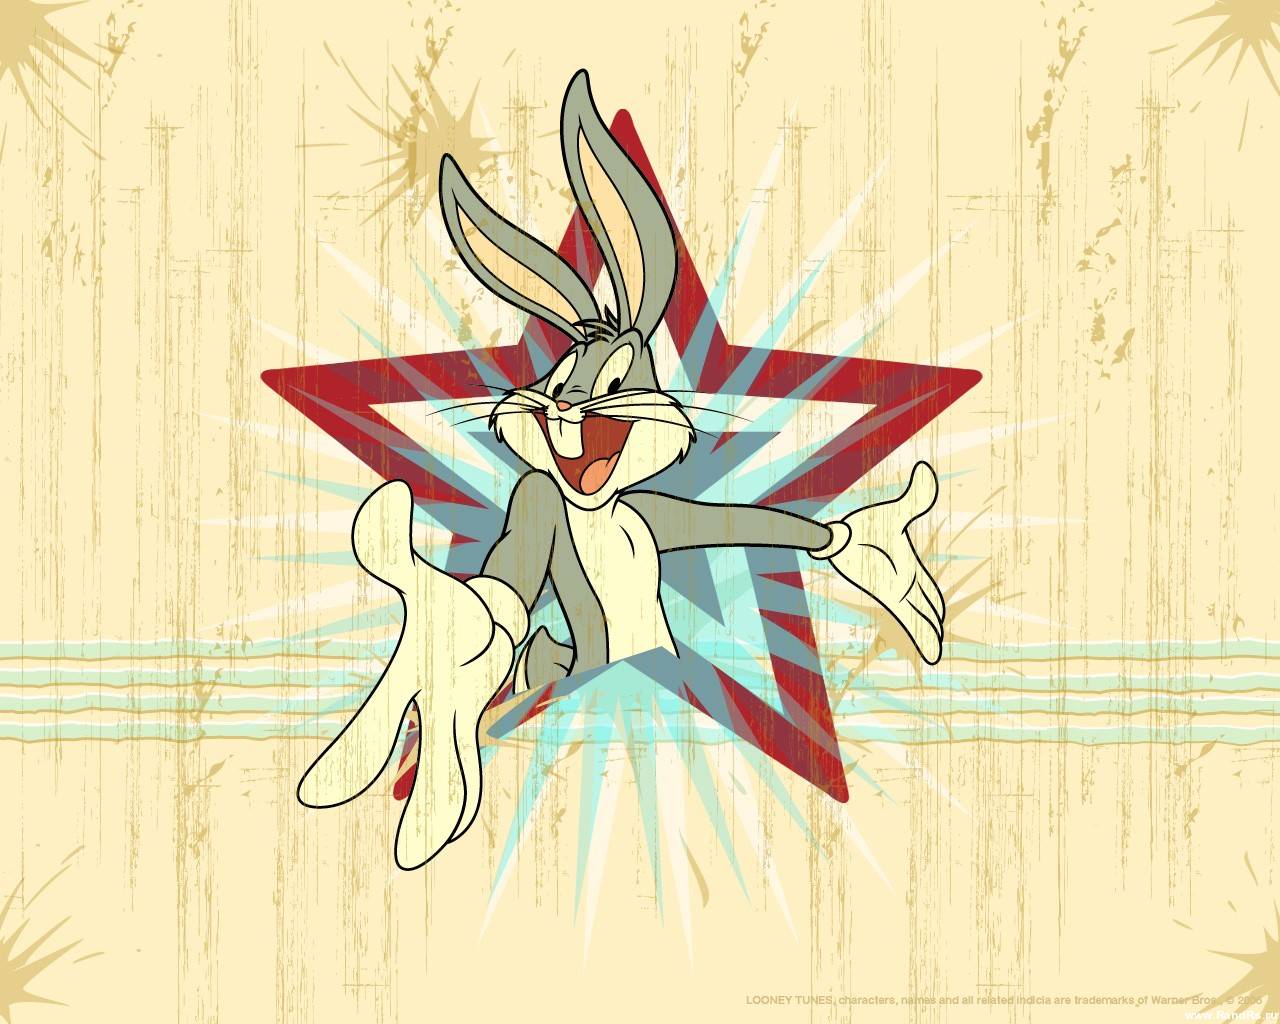 Bugs Bunny wallpaper download free wallpaper on a